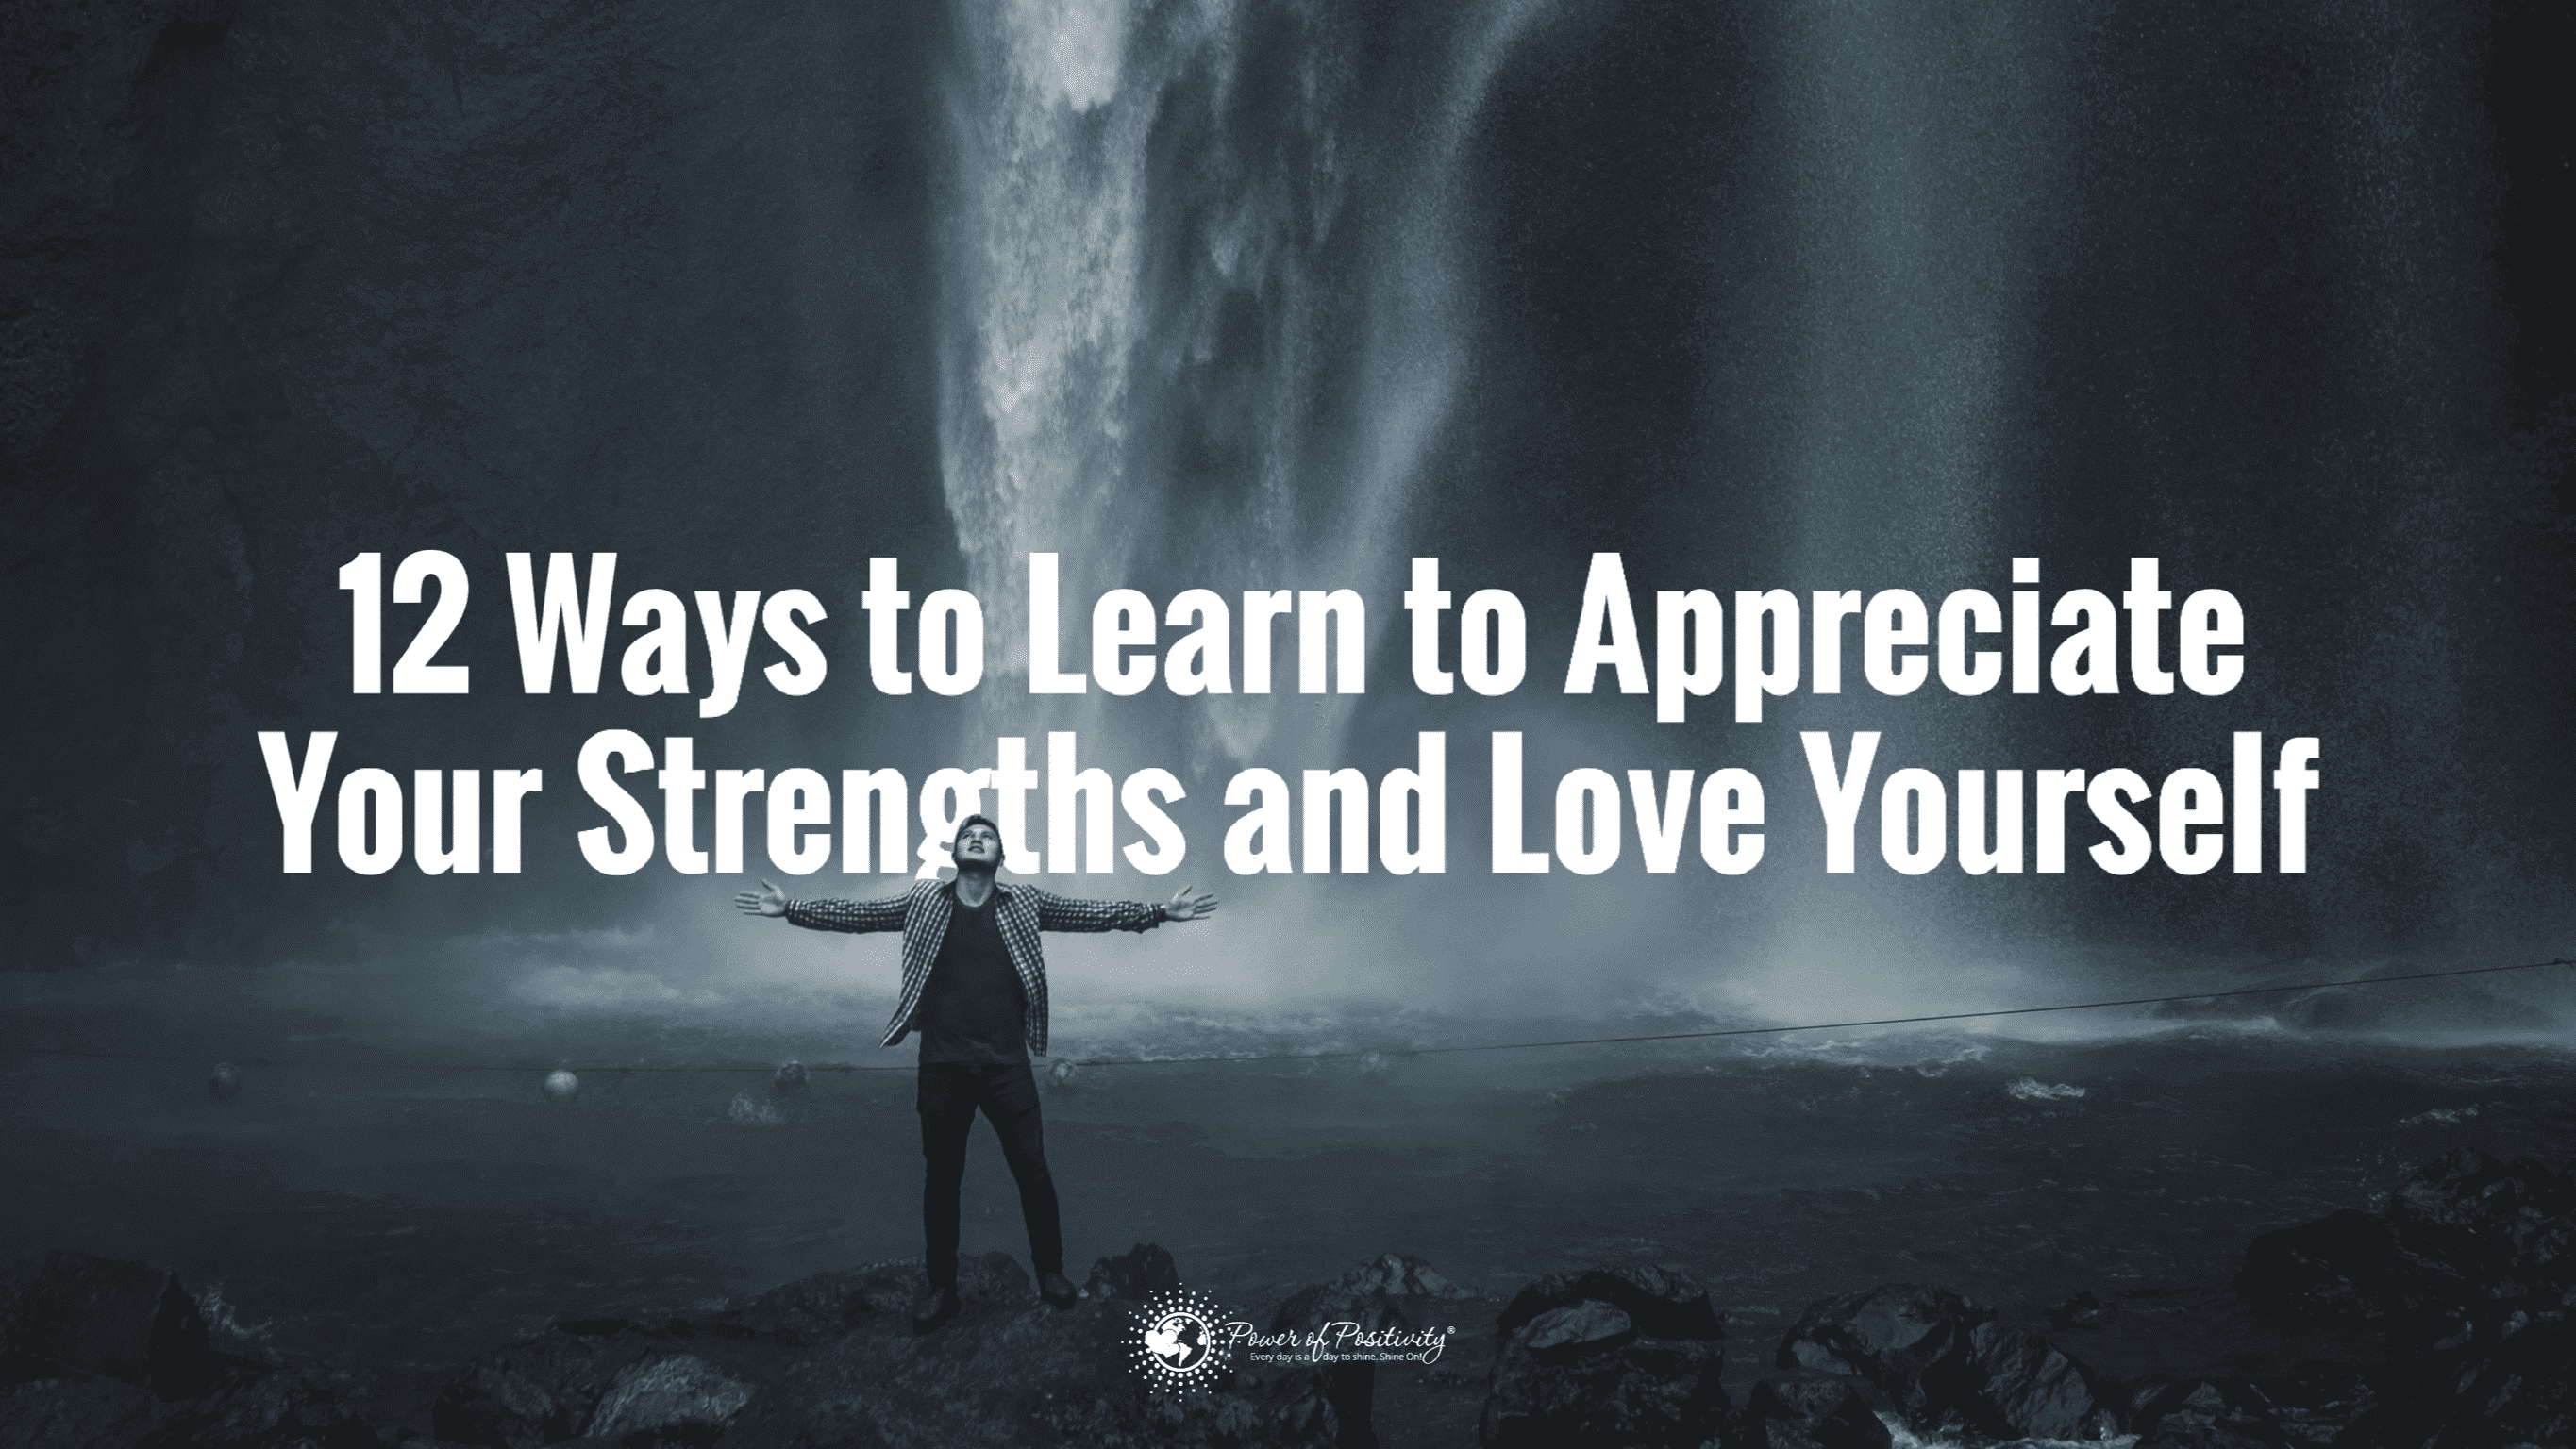 12 Ways to Learn to Appreciate Your Strengths and Love Yourself